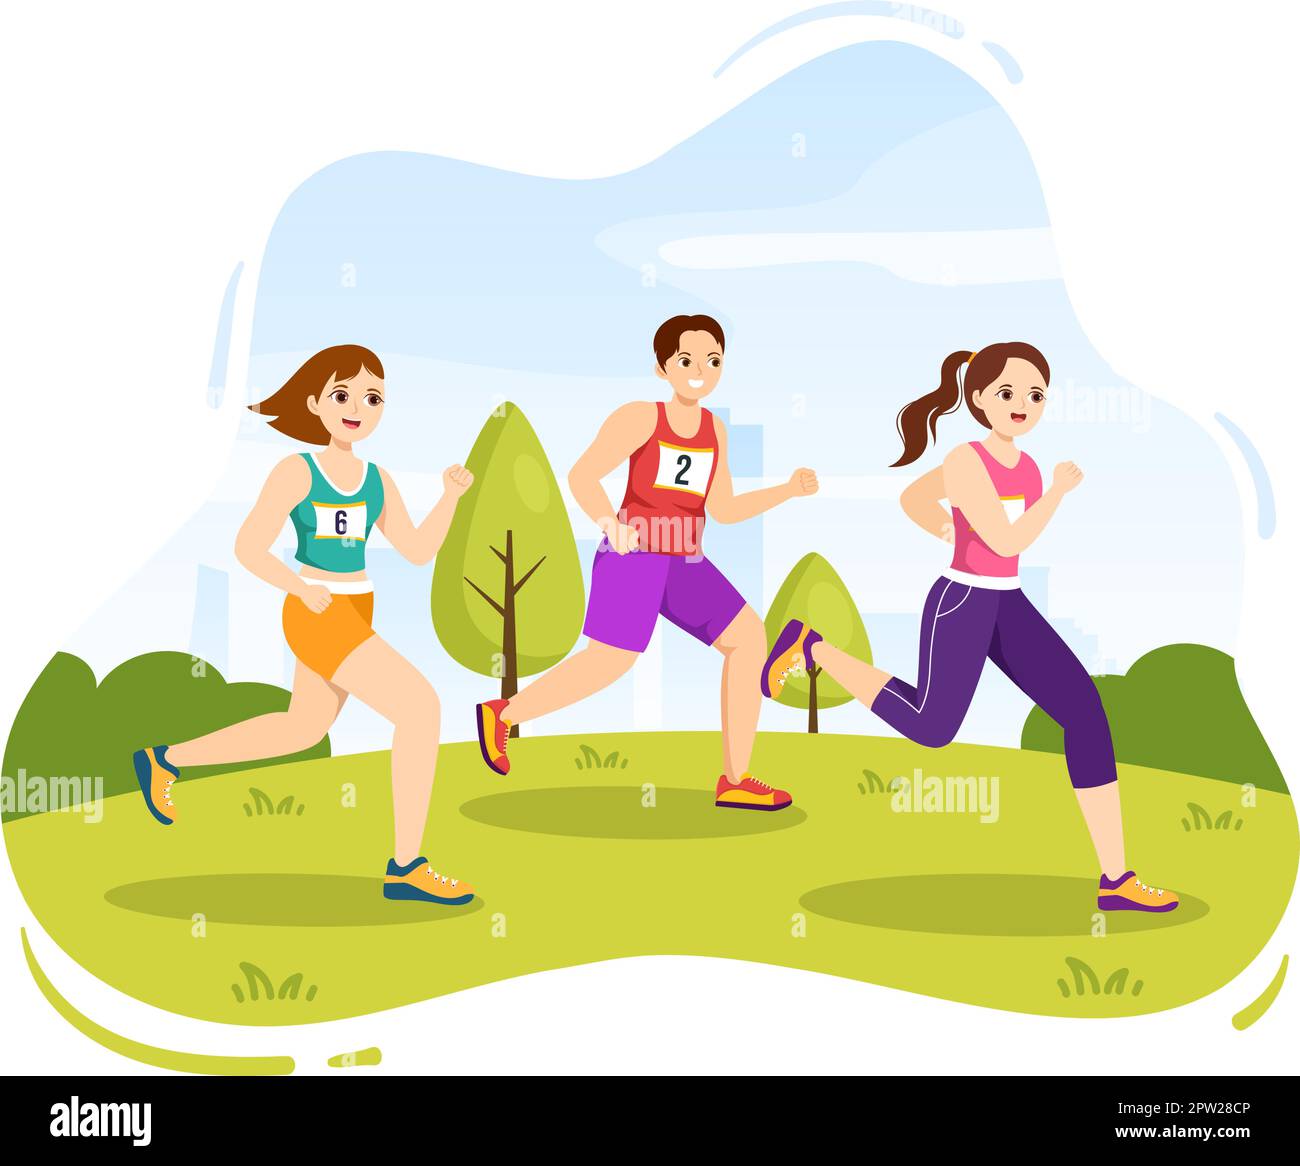 Marathon Race Illustration with People Running, Jogging Sport Tournament and Run to Reach the Finish Line in Flat Cartoon Hand Drawn Template Stock Vector